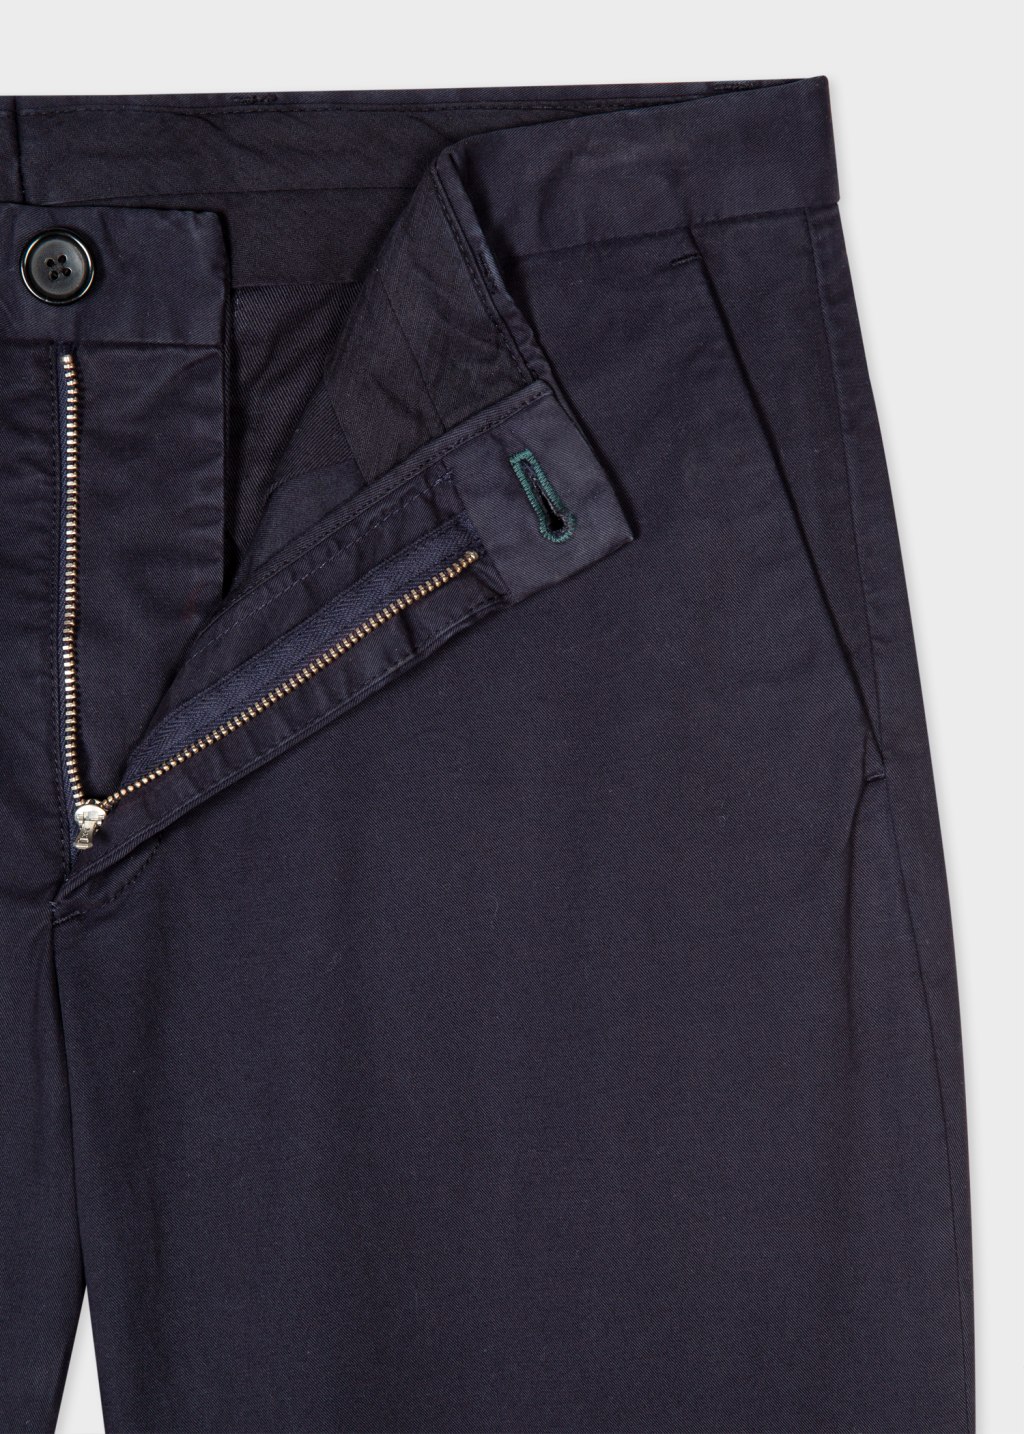 Detail View - Navy Mid-Fit 'Broad Stripe Zebra' Chinos Paul Smith